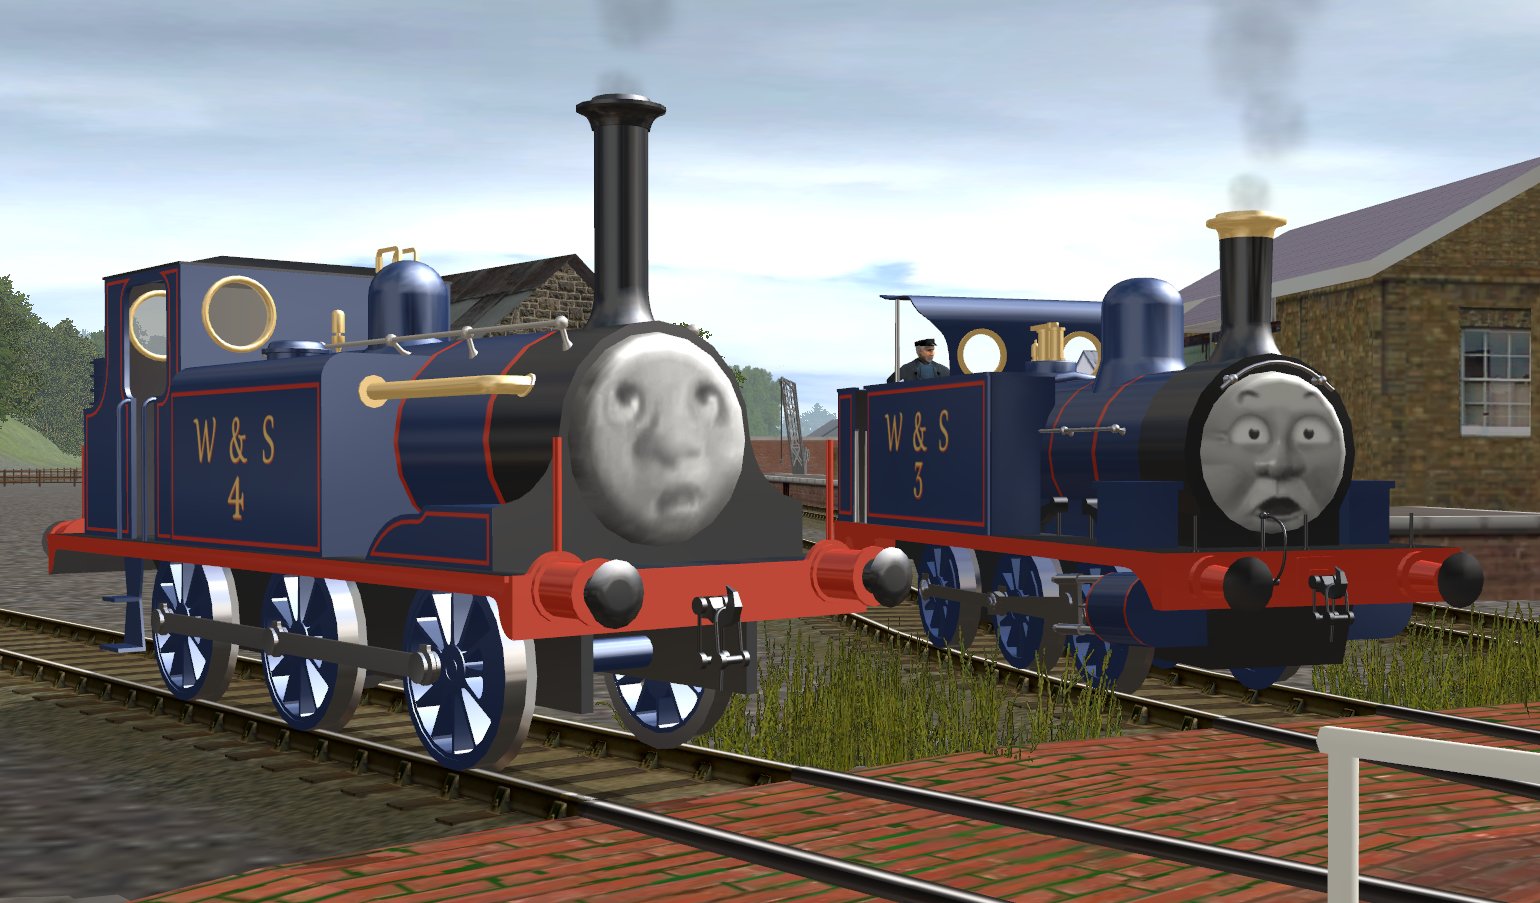 The Max Man on X: Since it only took a couple hours to get W&S no.4 in  Trainz, it should, in theory, take about 7 days to have a whole new facepack